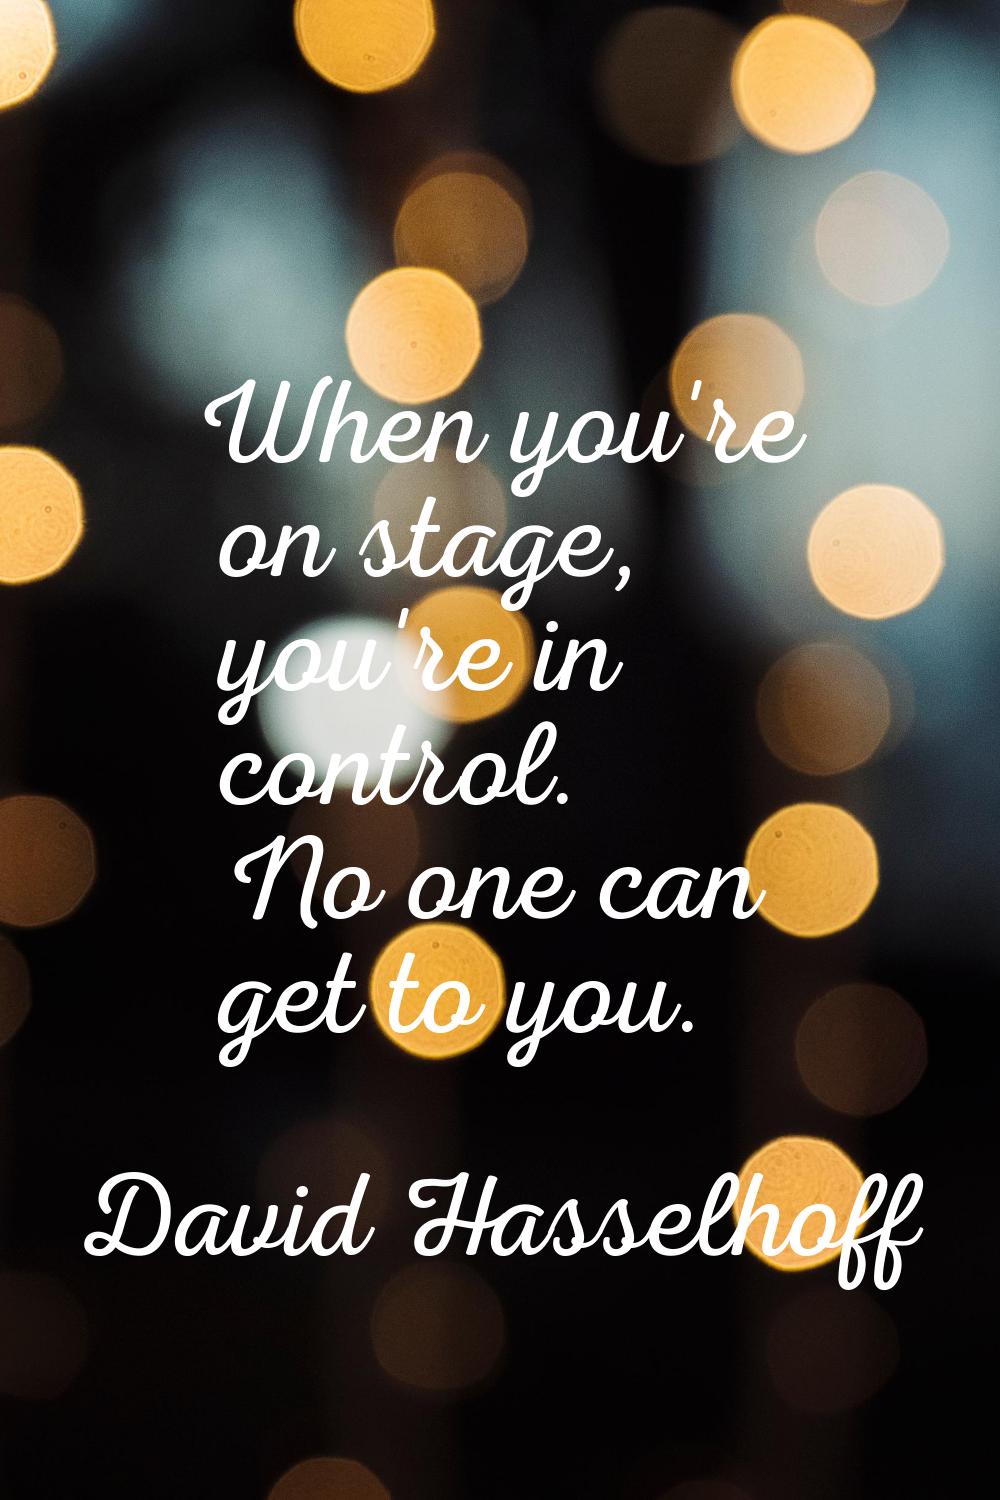 When you're on stage, you're in control. No one can get to you.